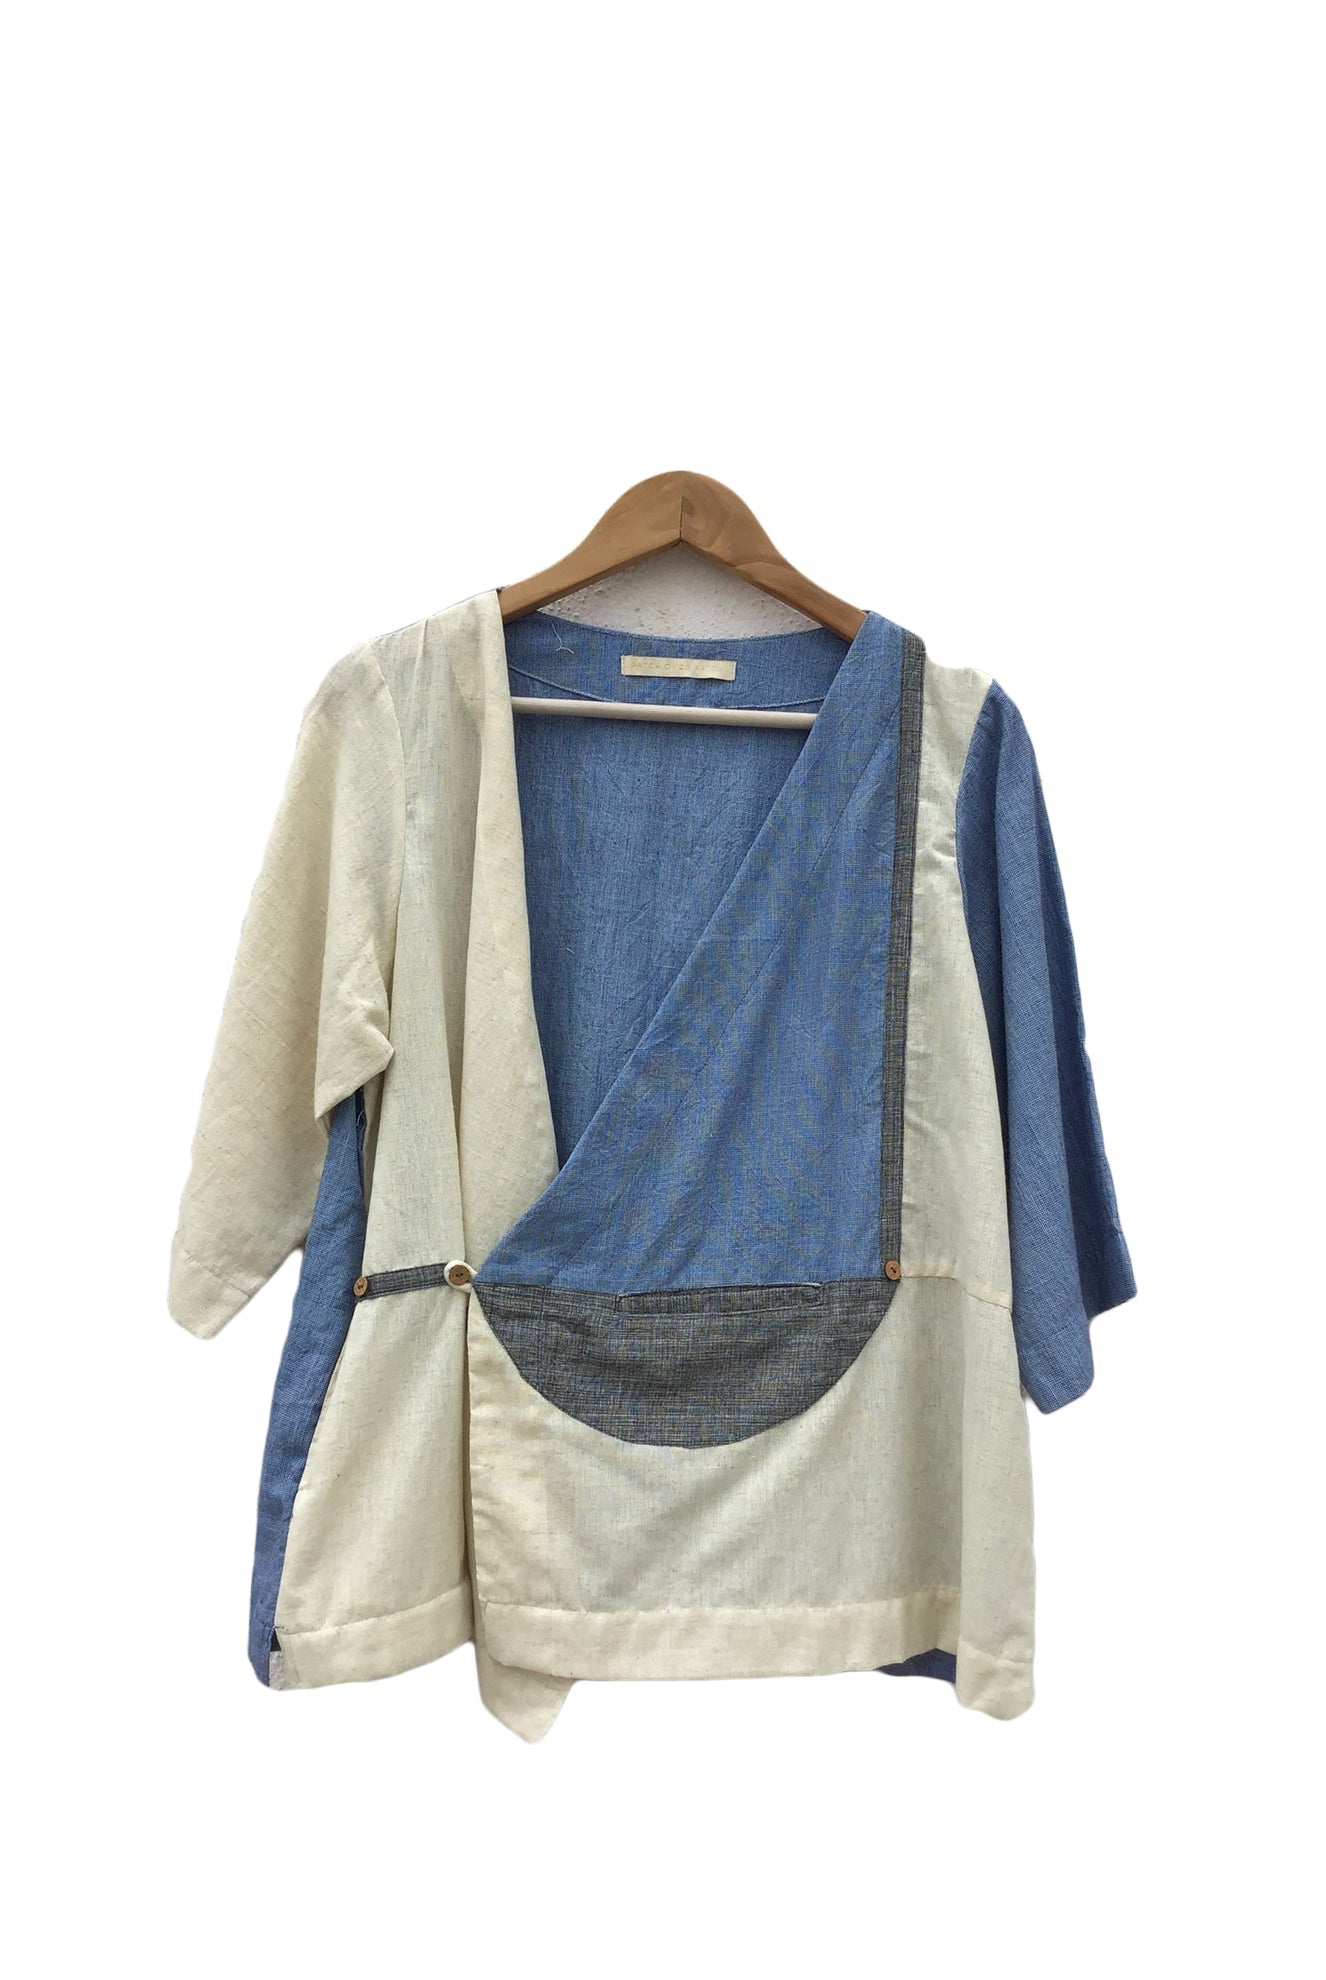 Wrap Top In Grey/Blue - CiceroniPatch Over Patch